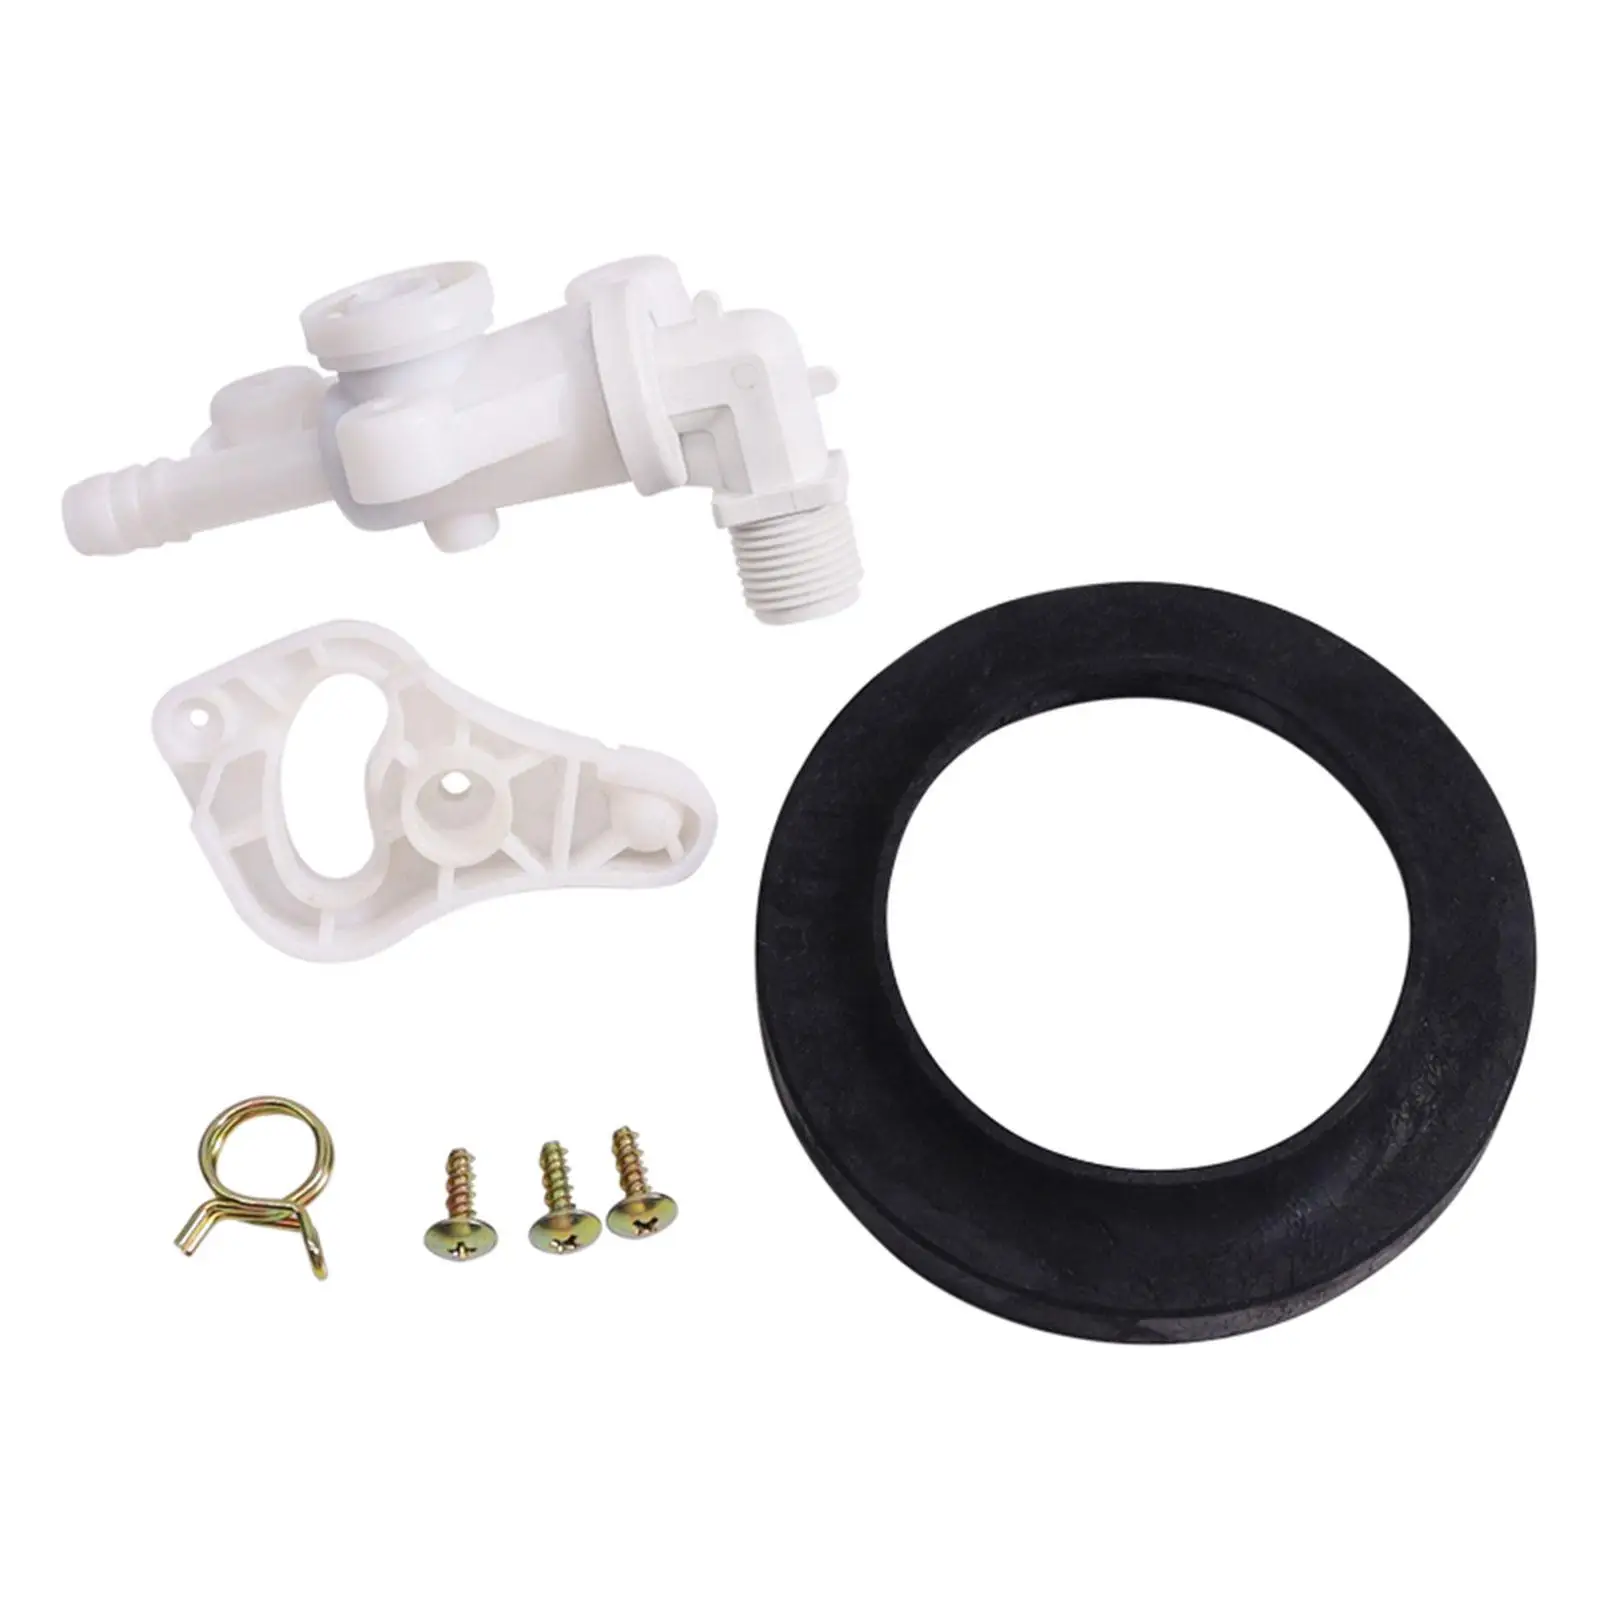 34100 RV Toilet Water Valve for Style Lite Toilets Accessory Replace Parts for Convenient Practical Durable Easy to Install